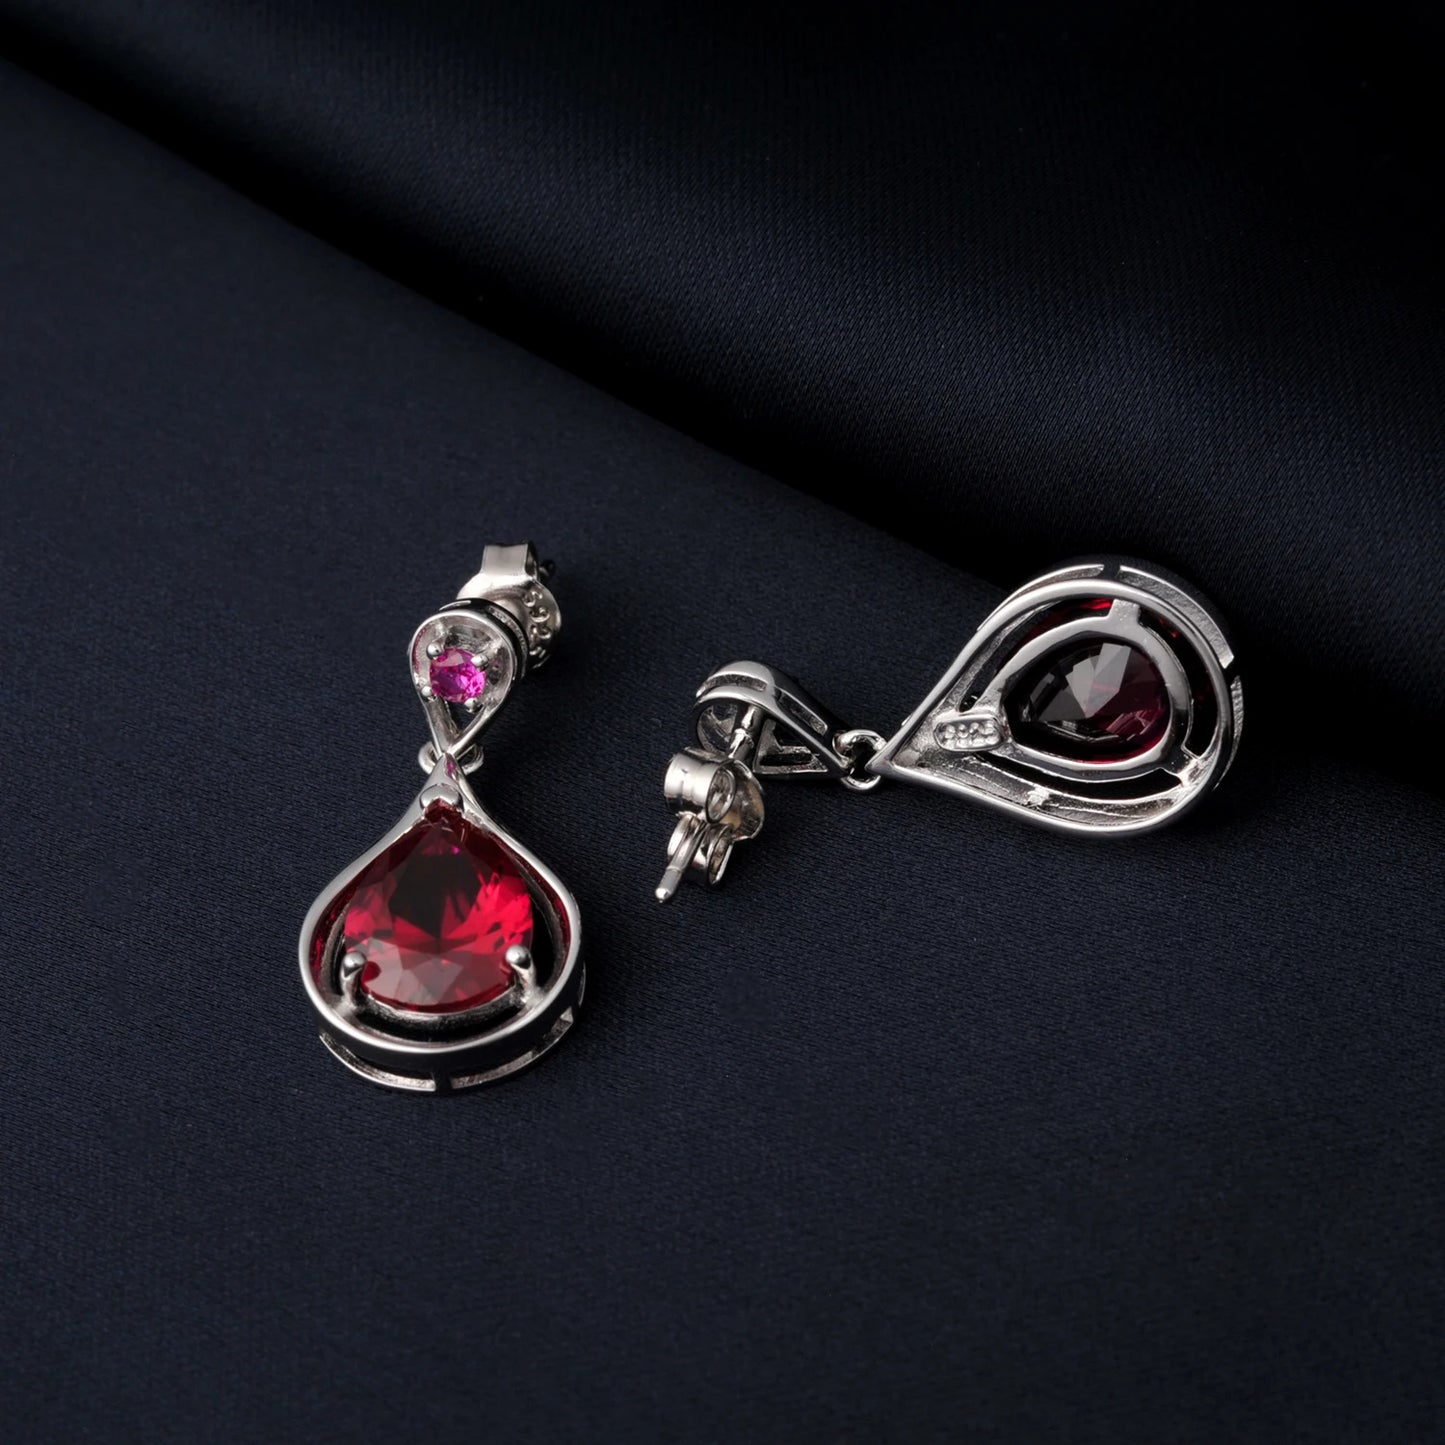 Potiy Pear Shape 7.5ct Created Ruby Drop Earrings elegant women 925 Sterling Silver for Women Daily Jewelry Valentine's day gift